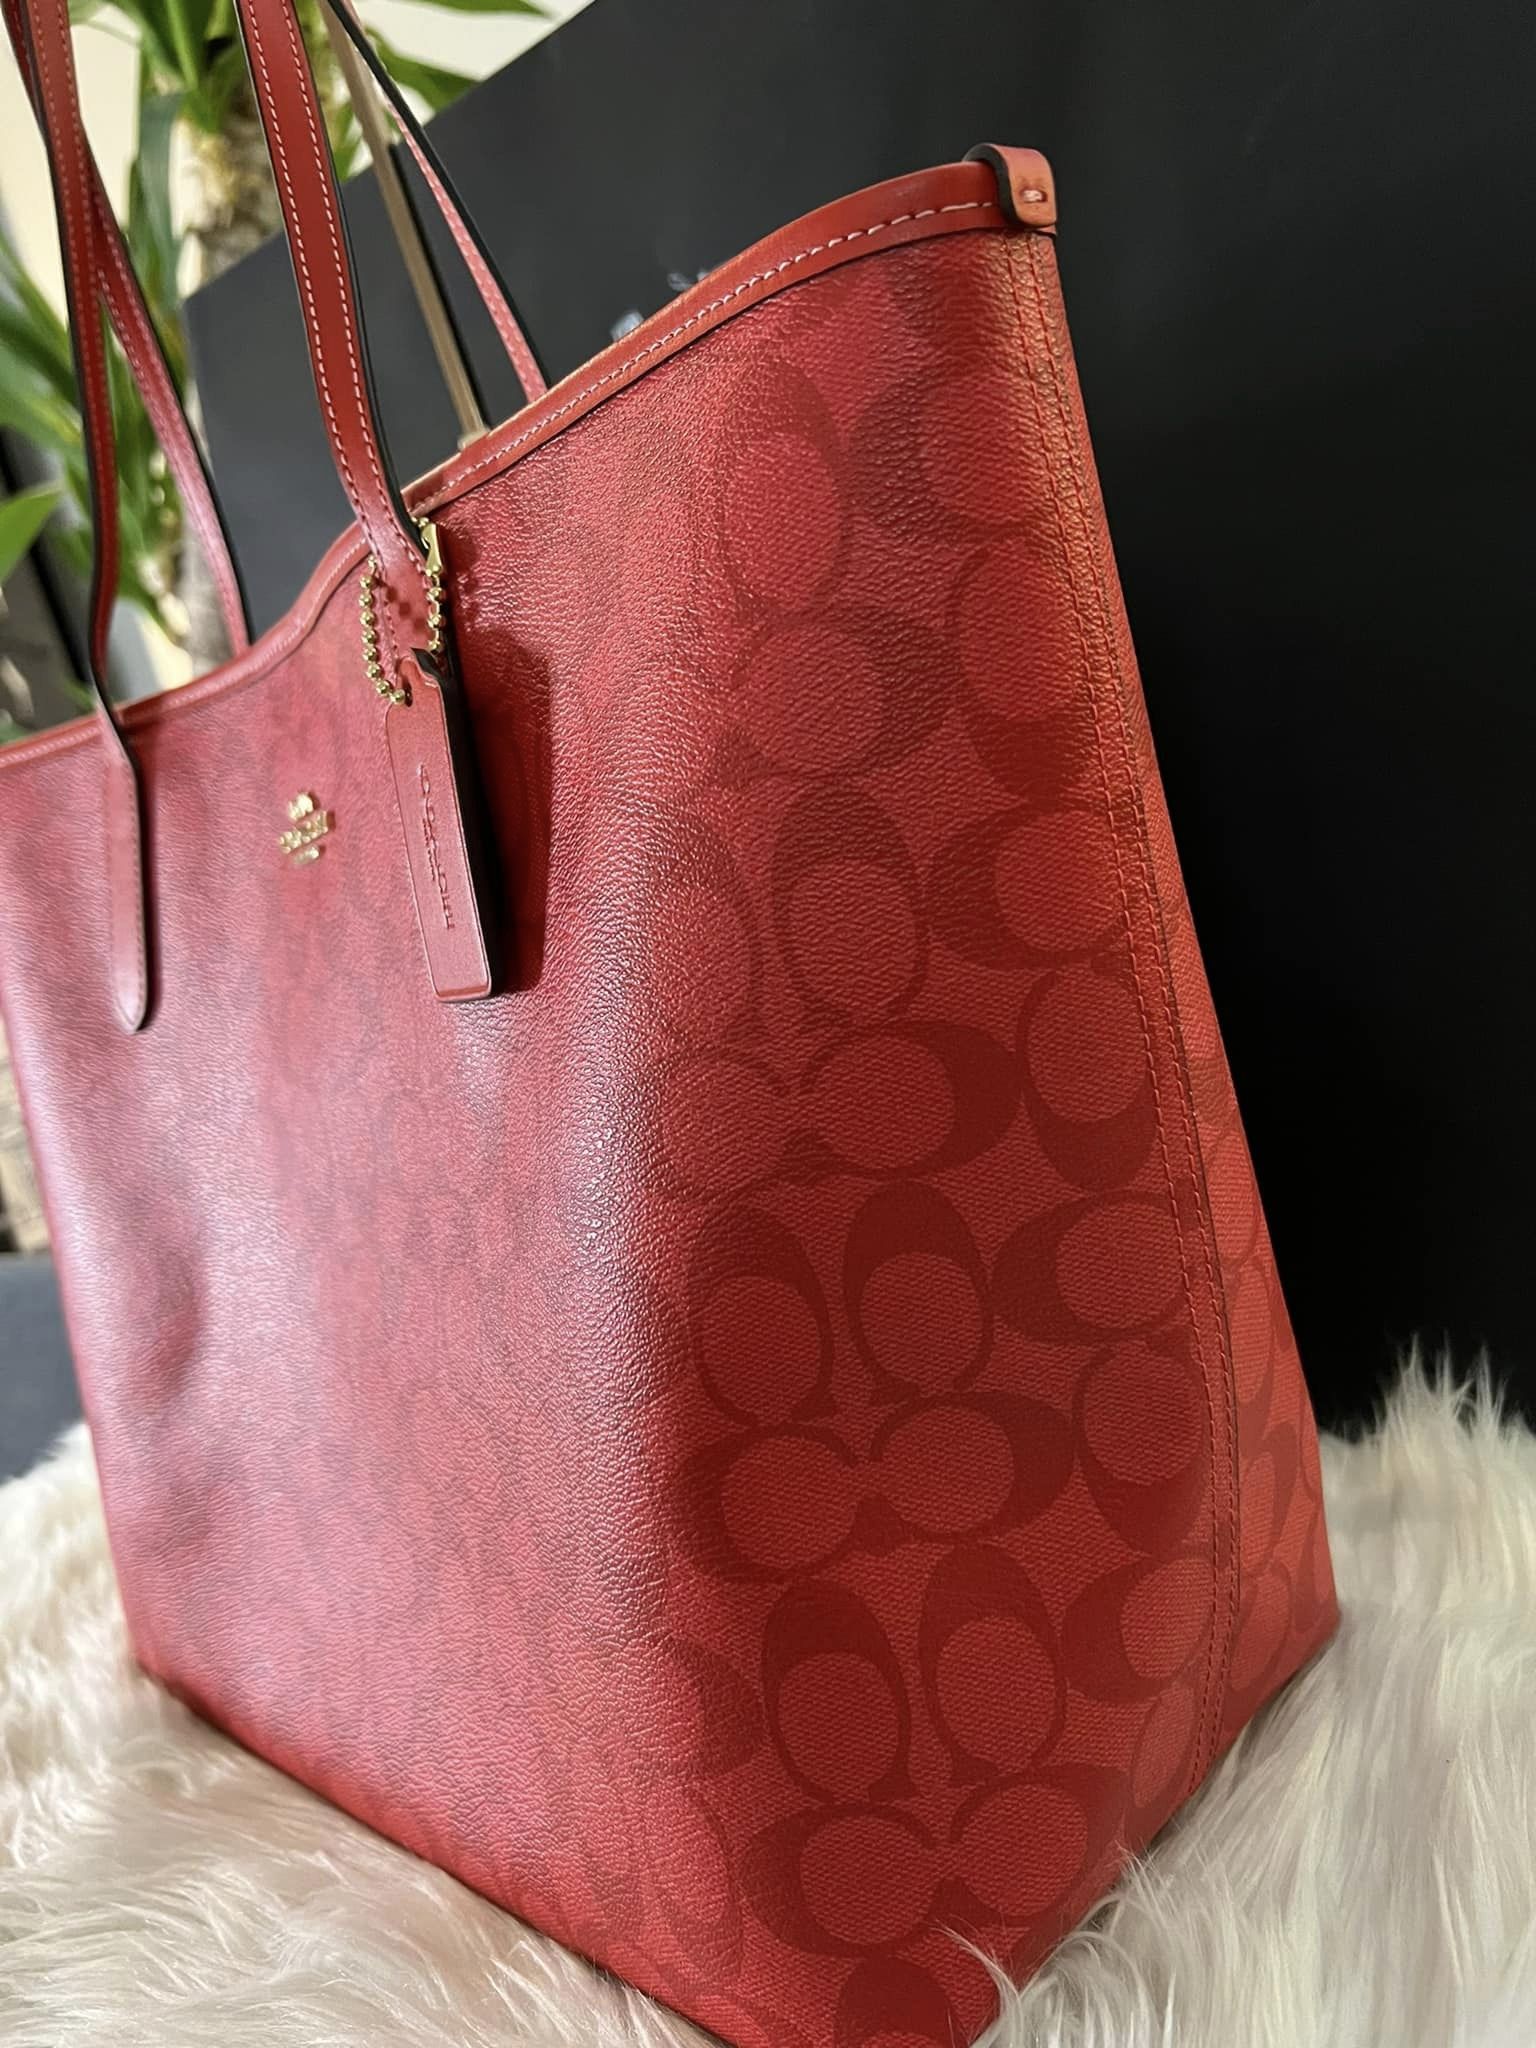 Coach Bags Coach City Tote, Brown/Red